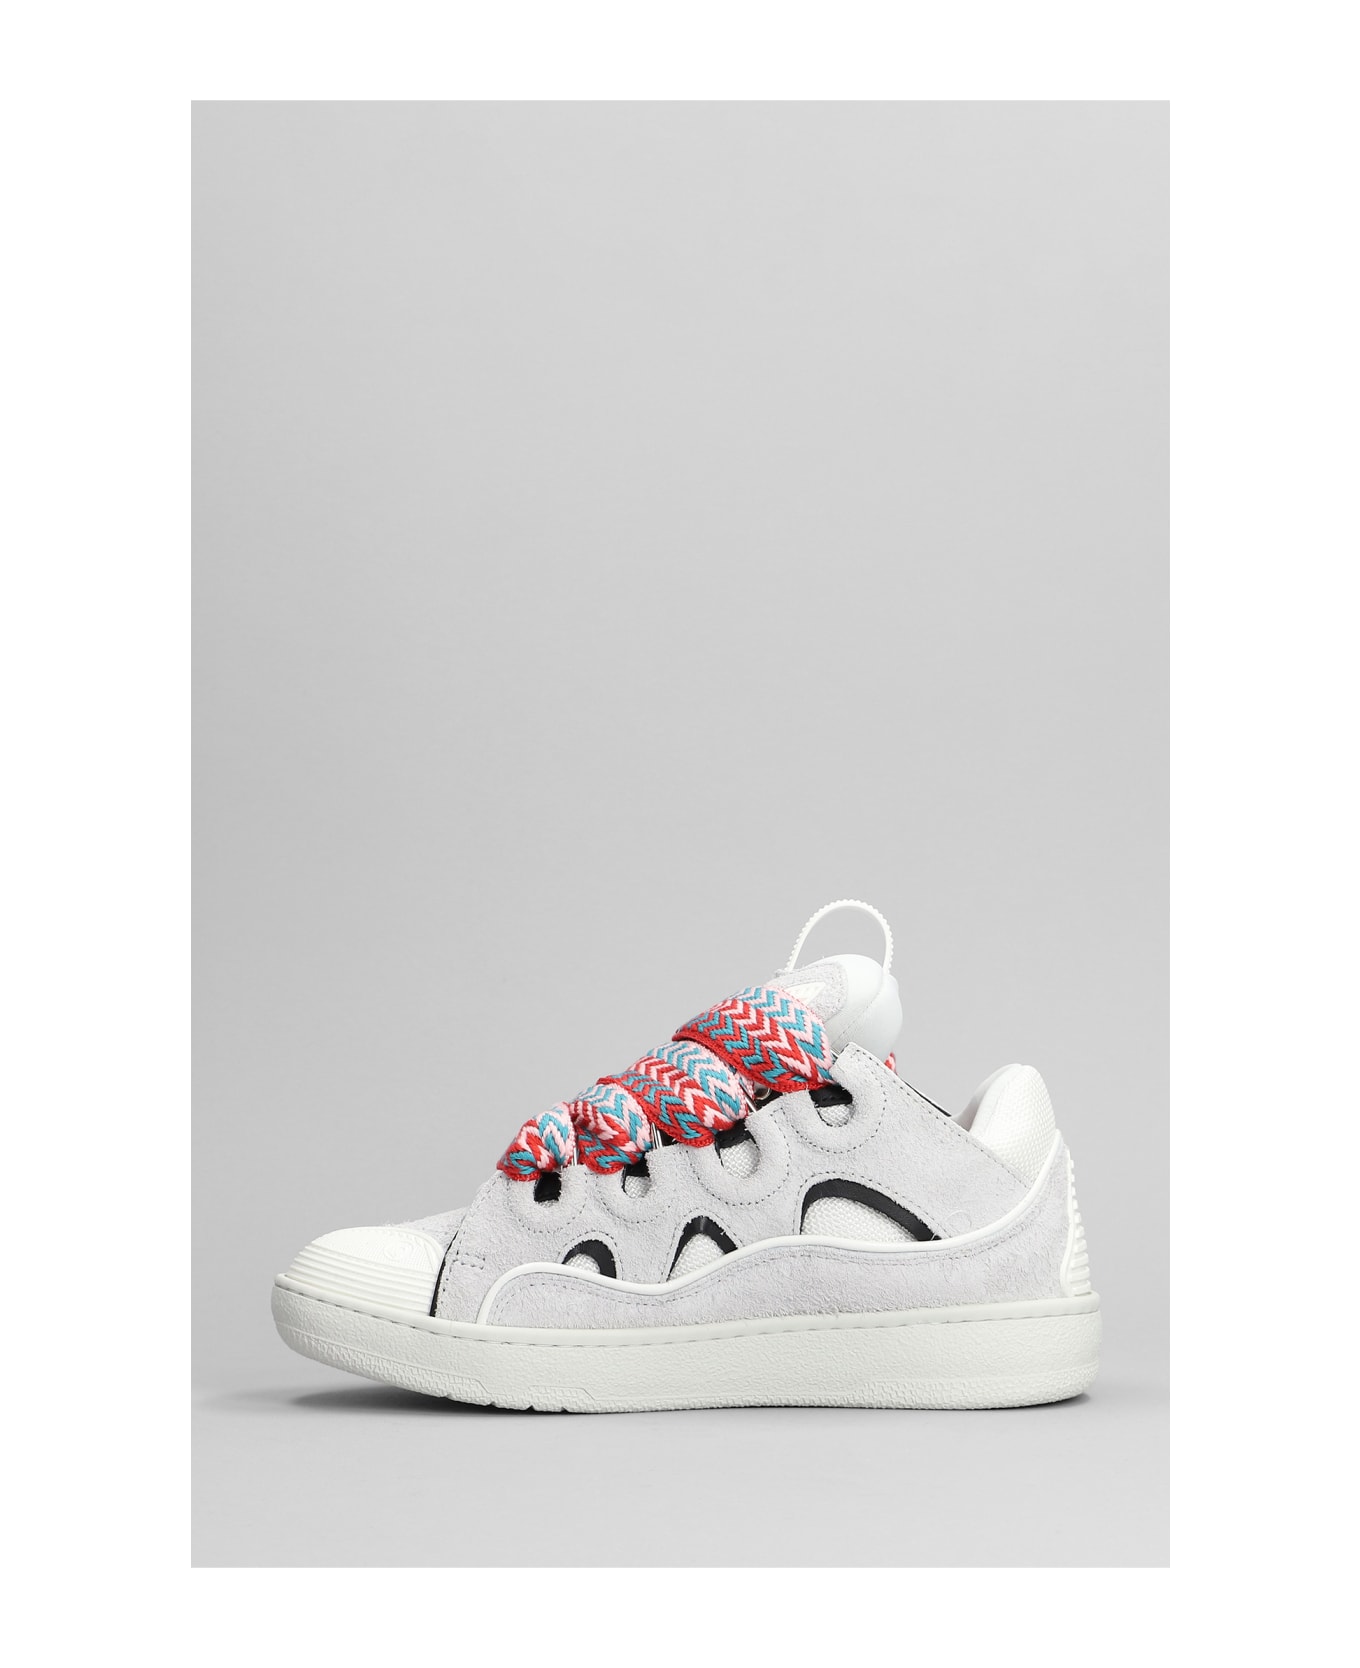 Lanvin Curb Sneakers In White Leather - white スニーカー